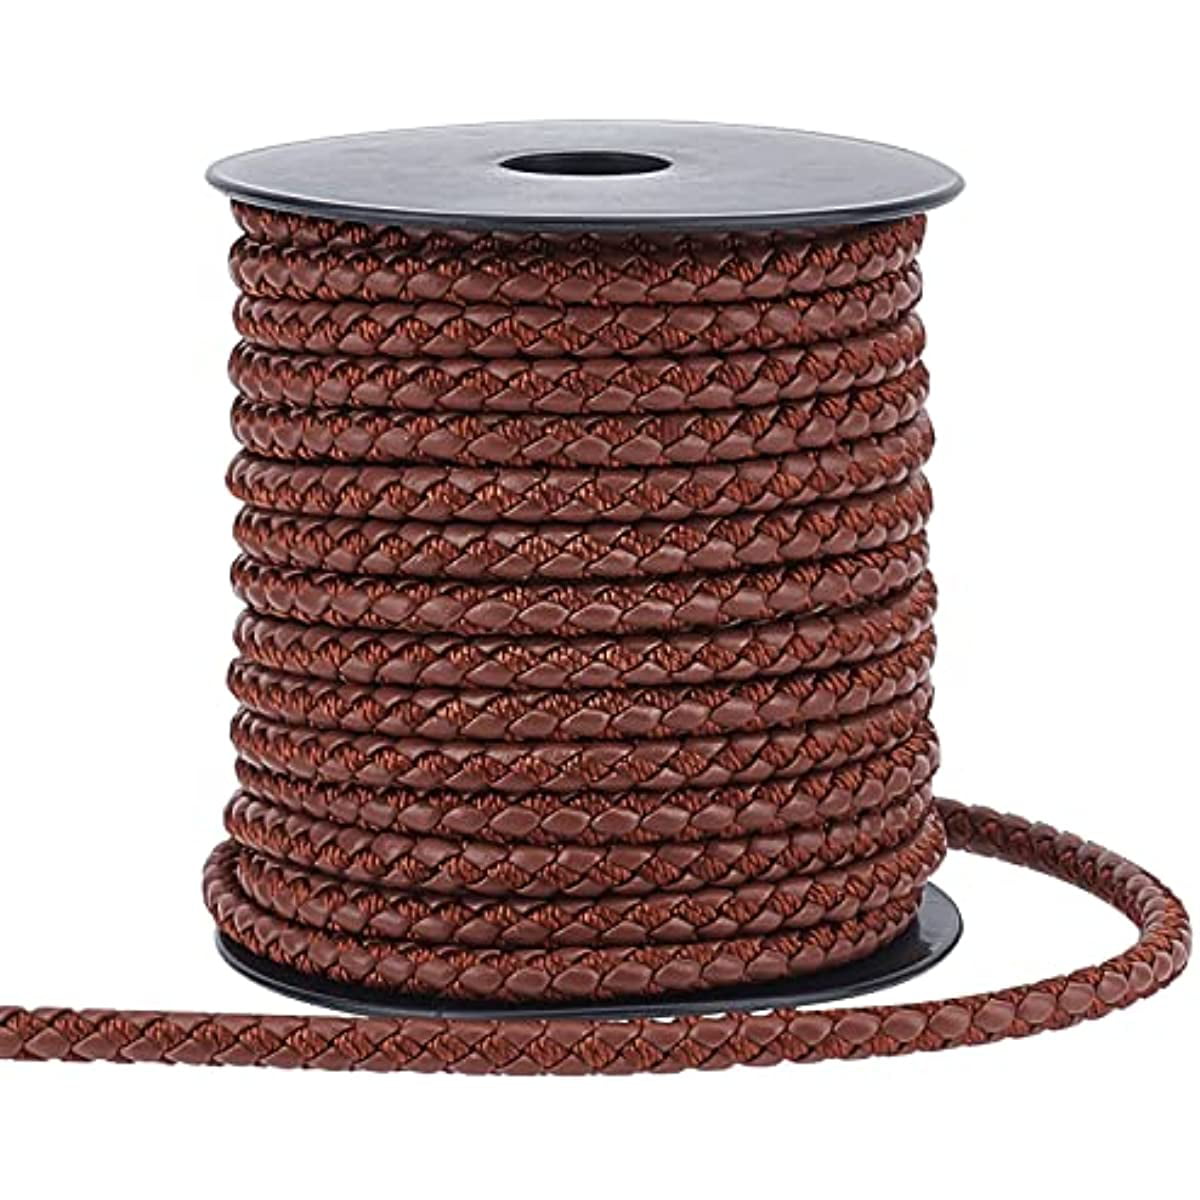 Round Leather Cord 2mm String, 27 Yards Rope for Jewelry Making, Bracelets,  Necklaces, Kumihimo Braiding, Wraps, Crafts, Hobby, and DIY Projects -  Distressed Saddle 2 MM Distressed Saddle